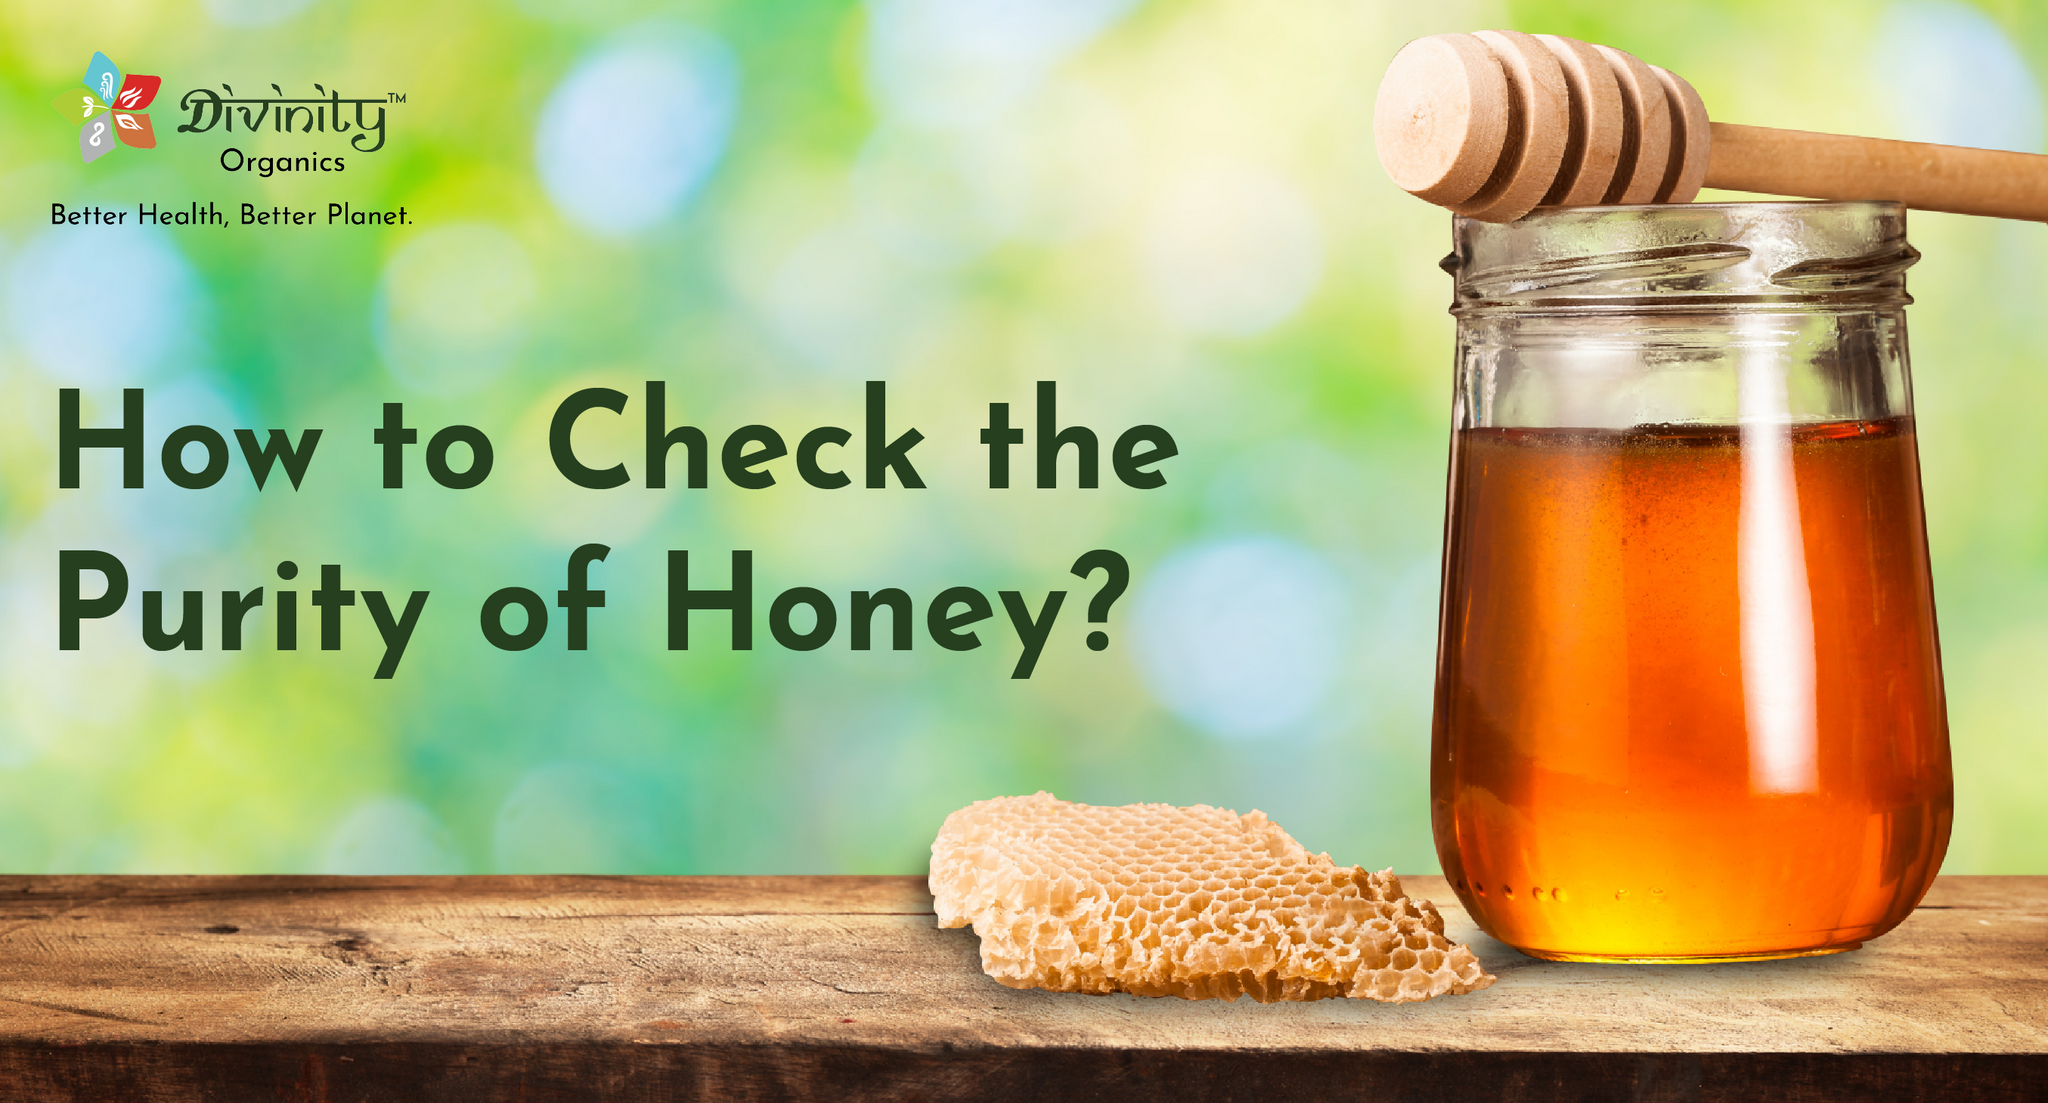 How to check the purity of honey